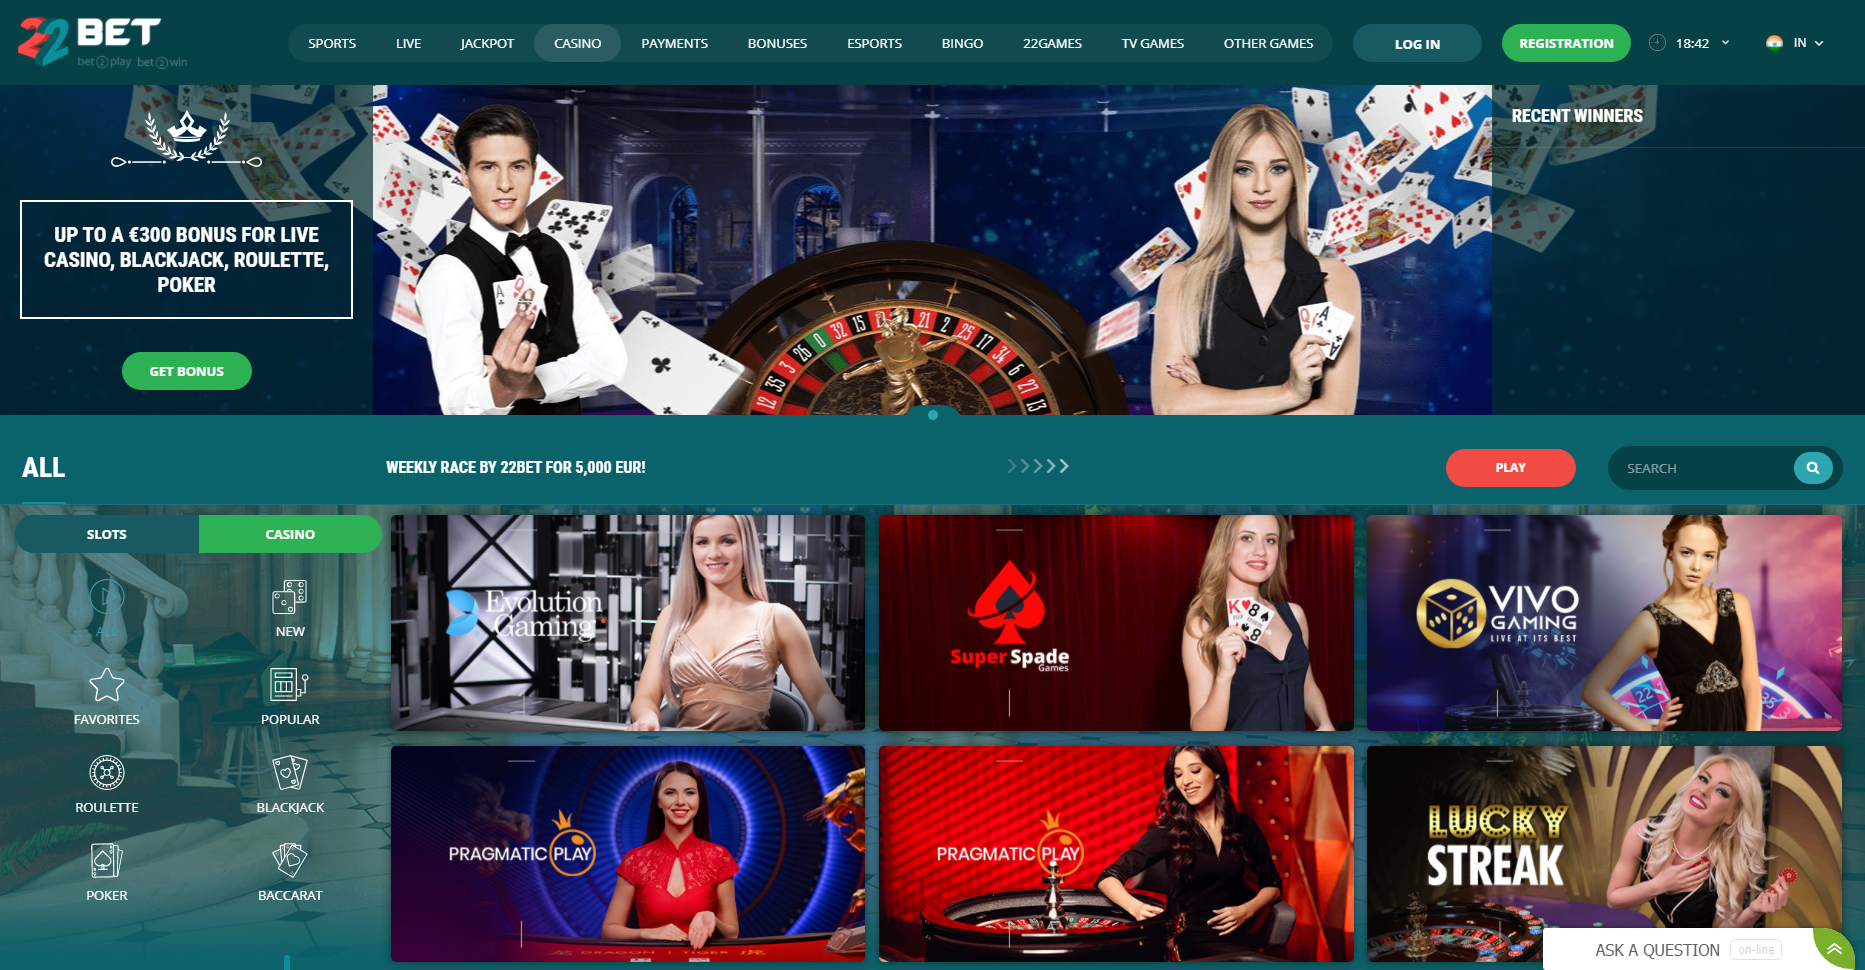 22Bet sportsbook and casino in India